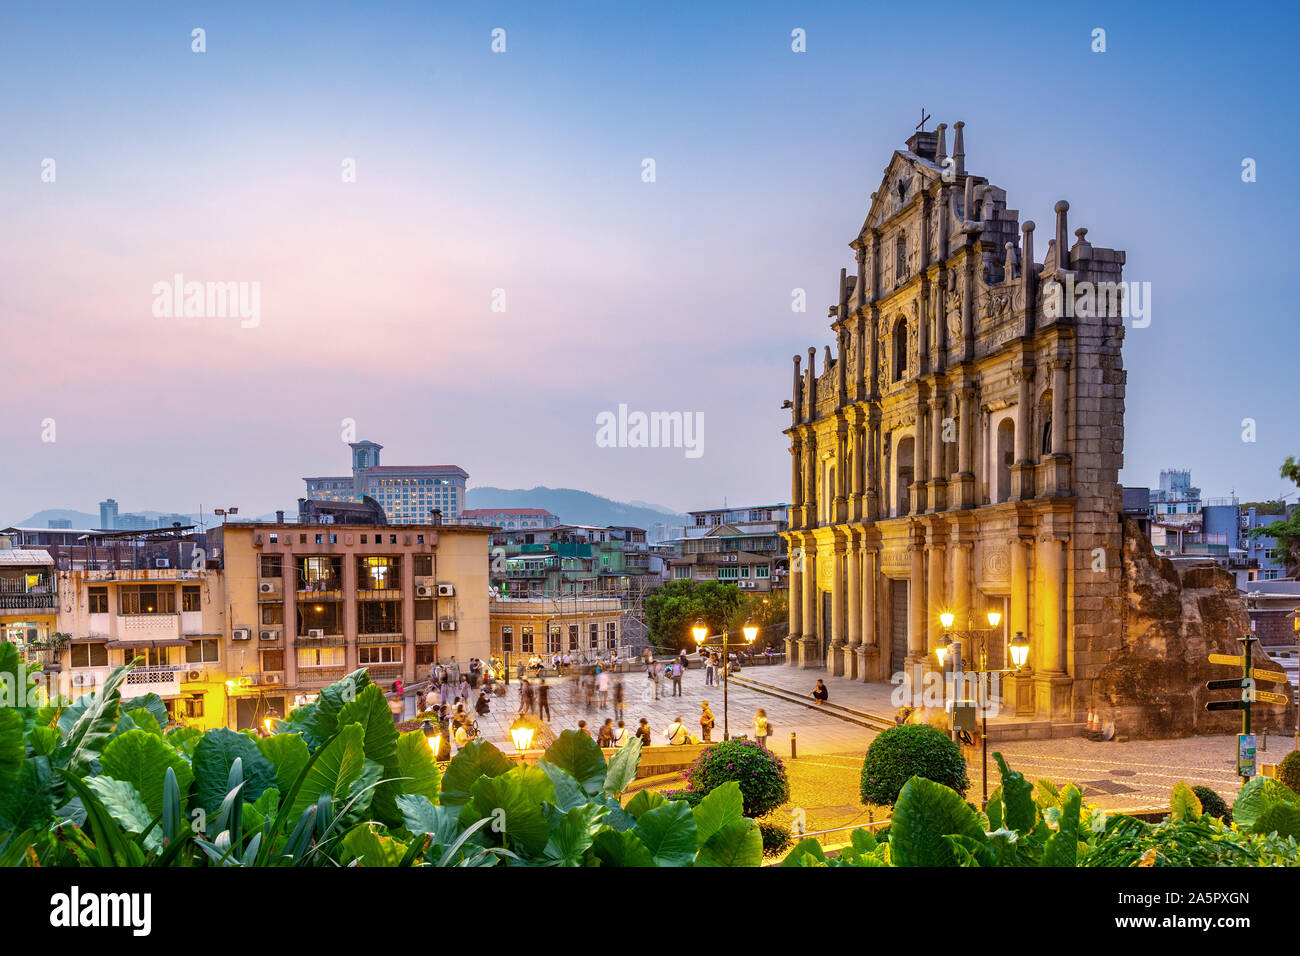 The Ruins of St. Paul's in Macao at night. Stock Photo